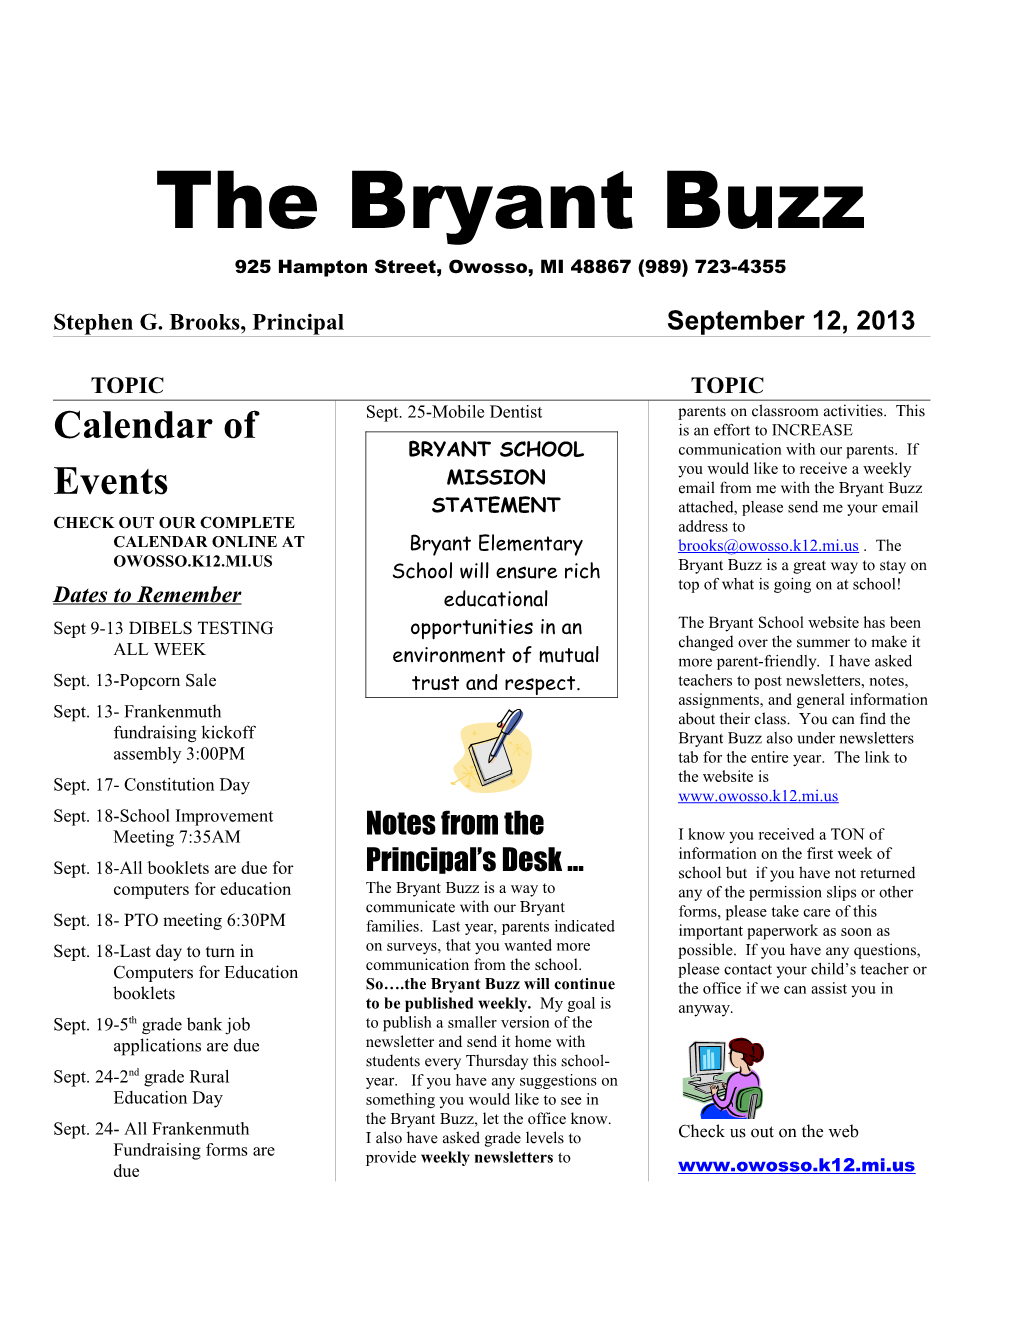 1The Bryant Buzz